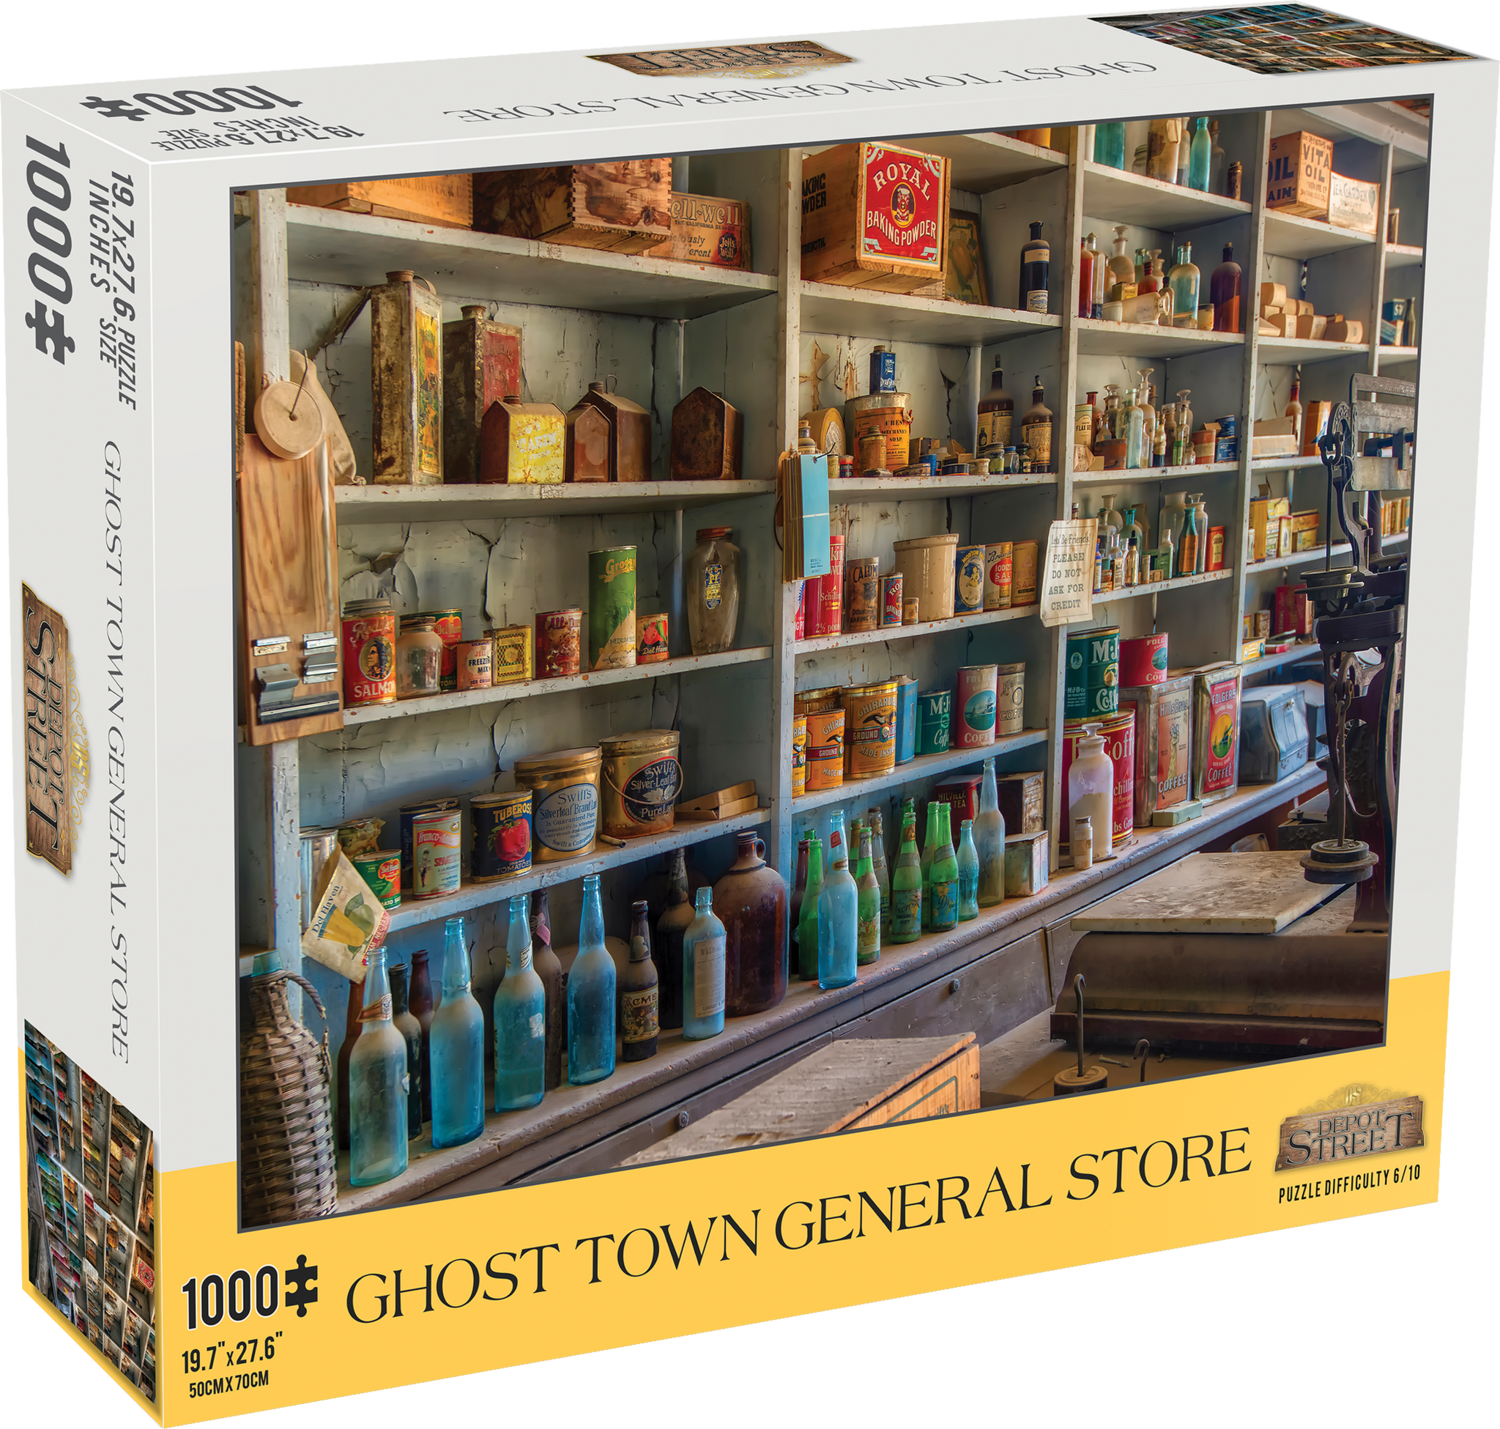 Ghost Town General Store 1000 Piece Jigsaw Puzzle